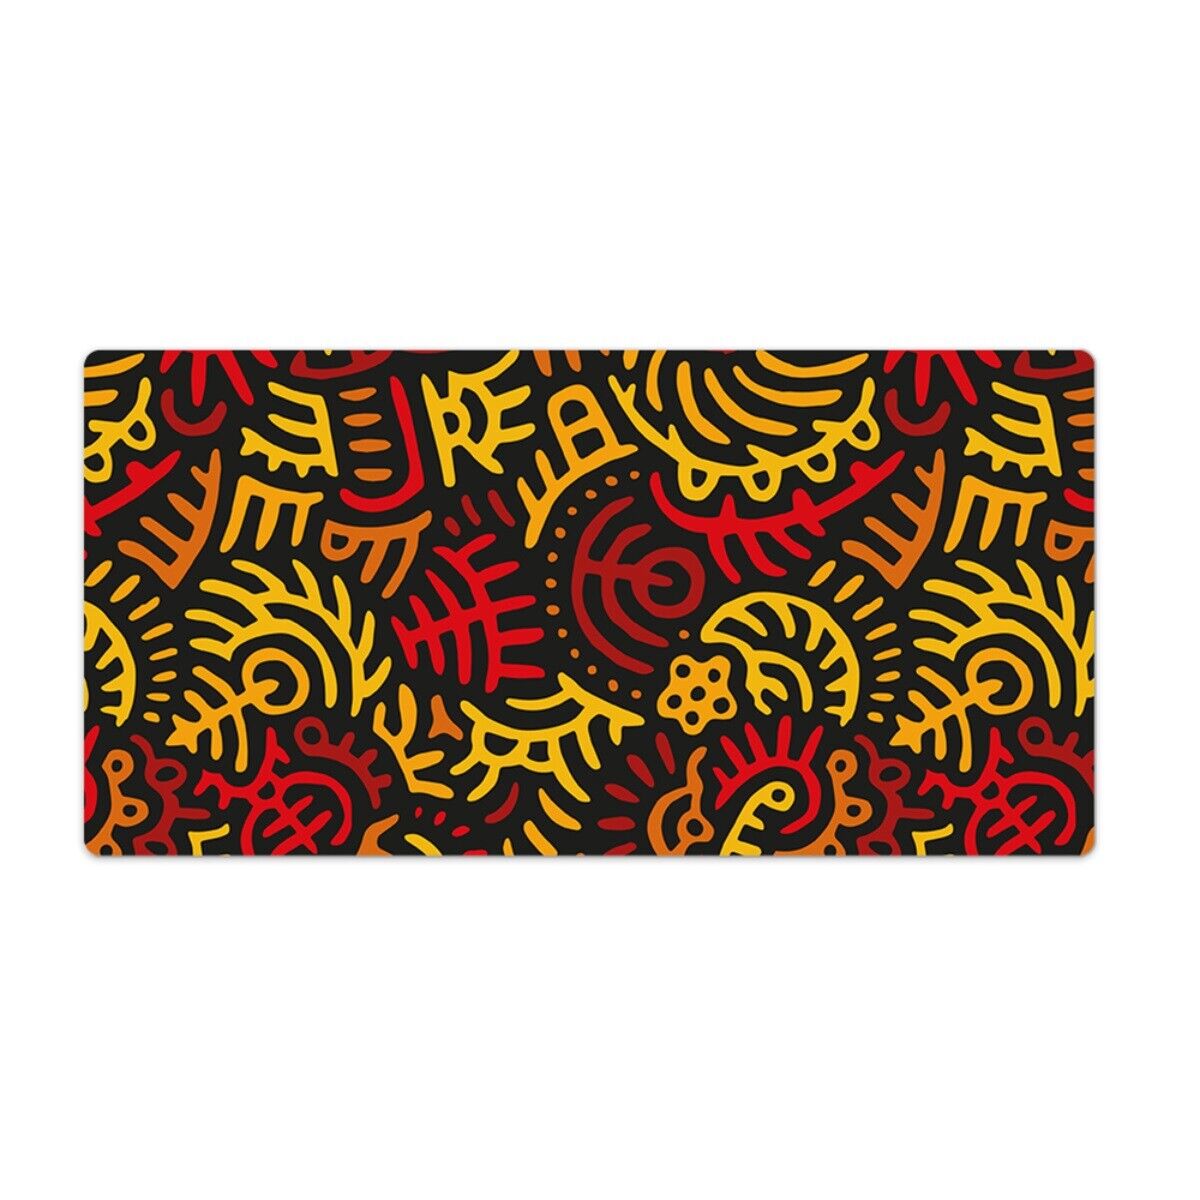 Home Office Writing Desk Computer Laptop Mat Pad Mexican patterns 120x60